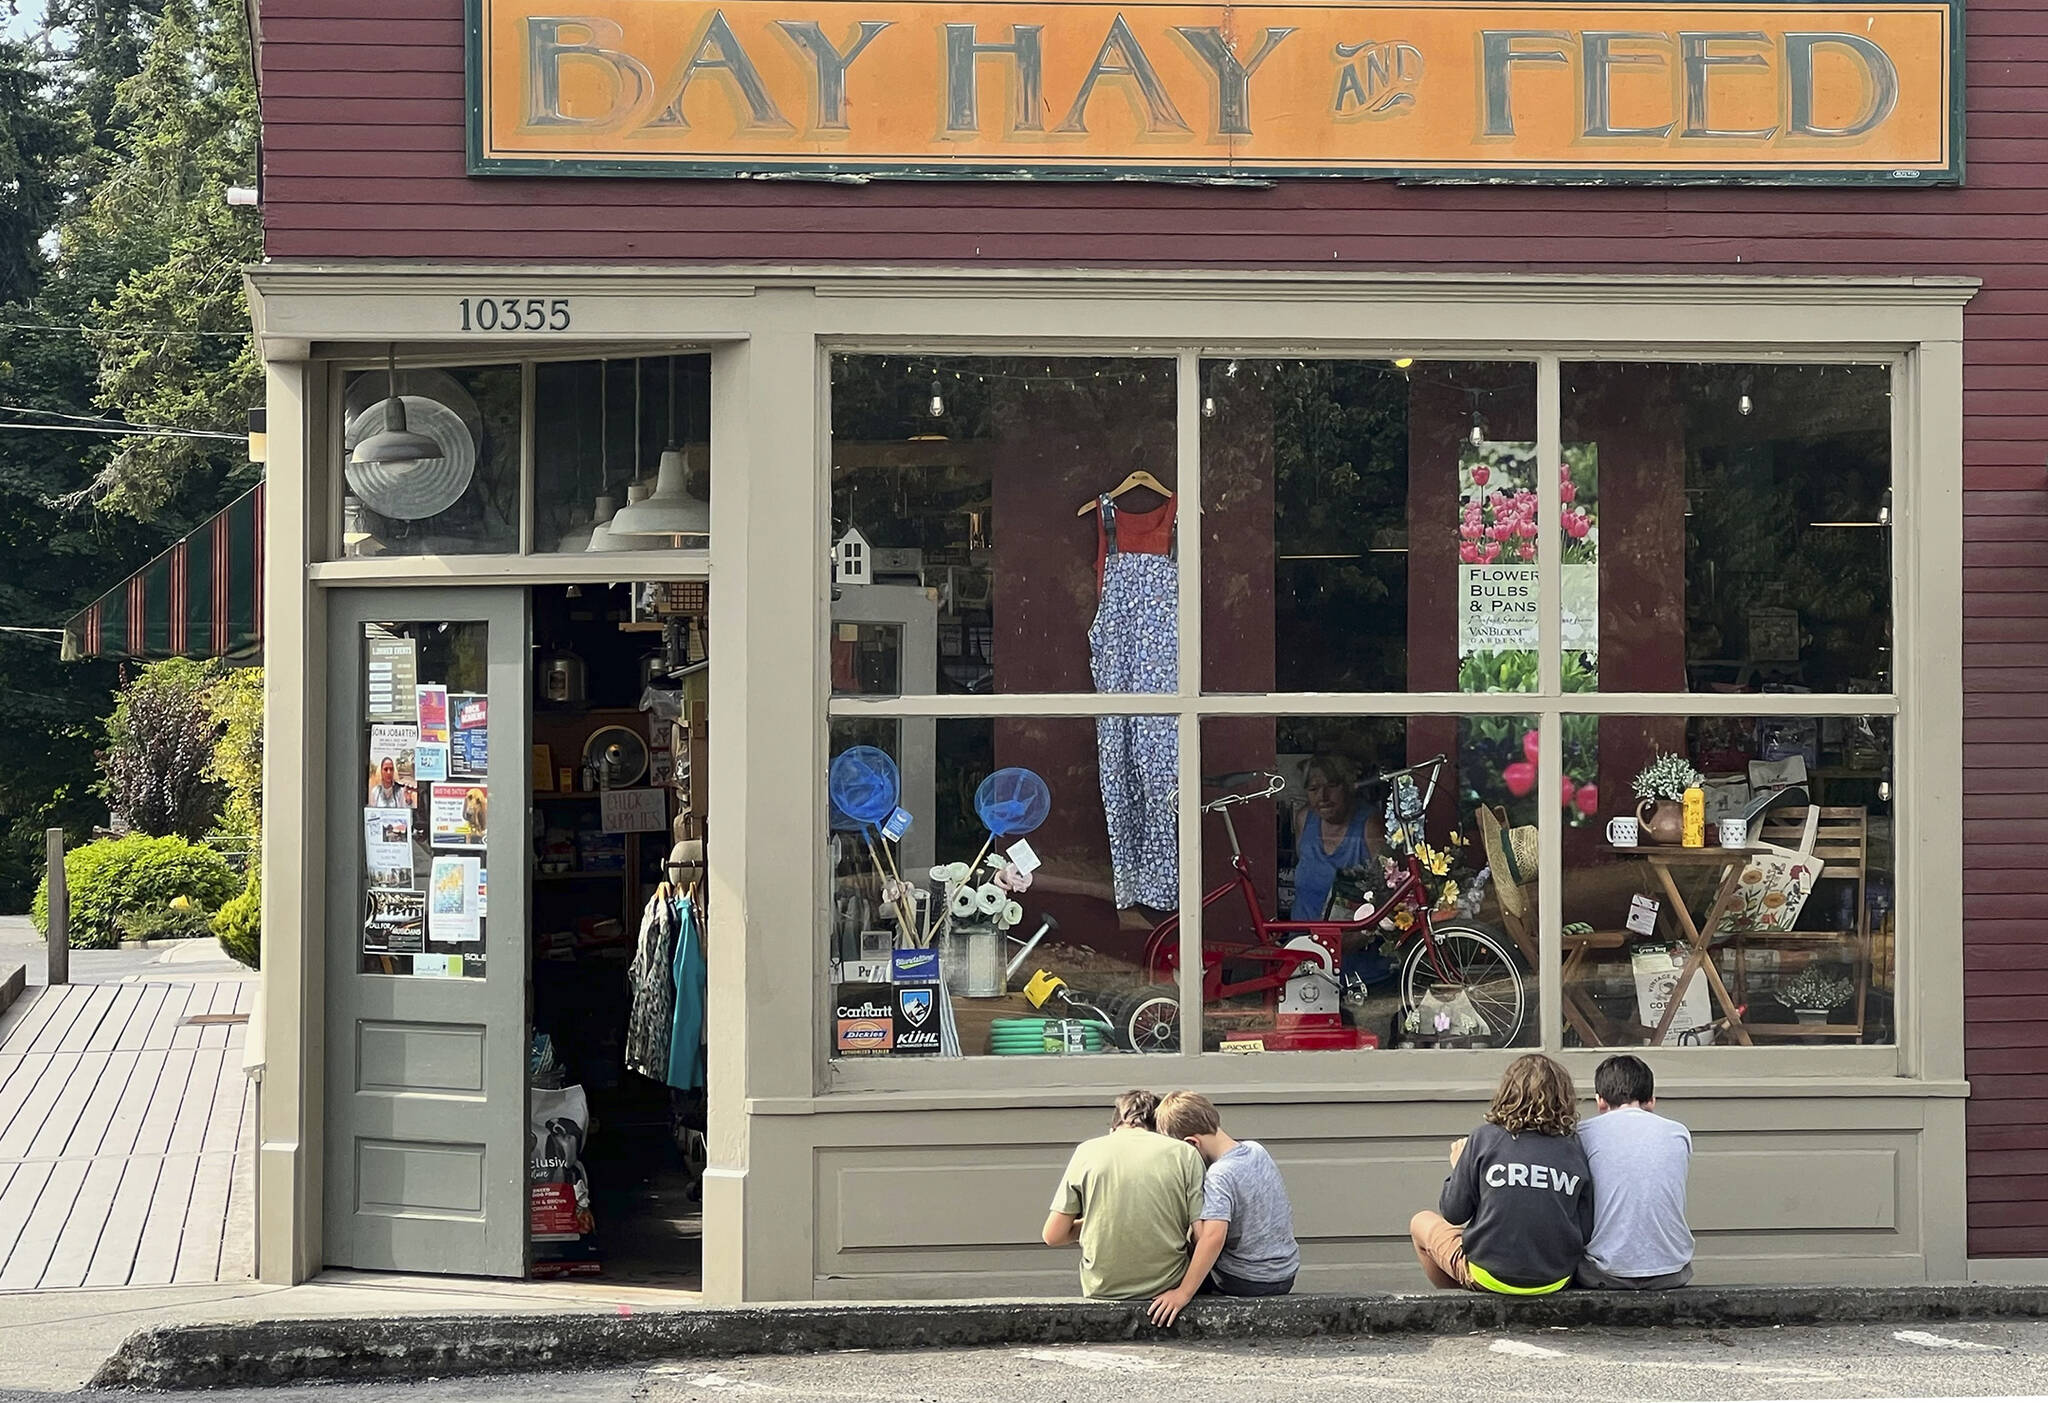 This courtesy photo taken by Rob Swan of the Bay Hay and Feed store in Rolling Bay looks like a Norman Rockwell image or something that could have come out of the 1950s as friends sit on a curb next to the Bainbridge Island store.